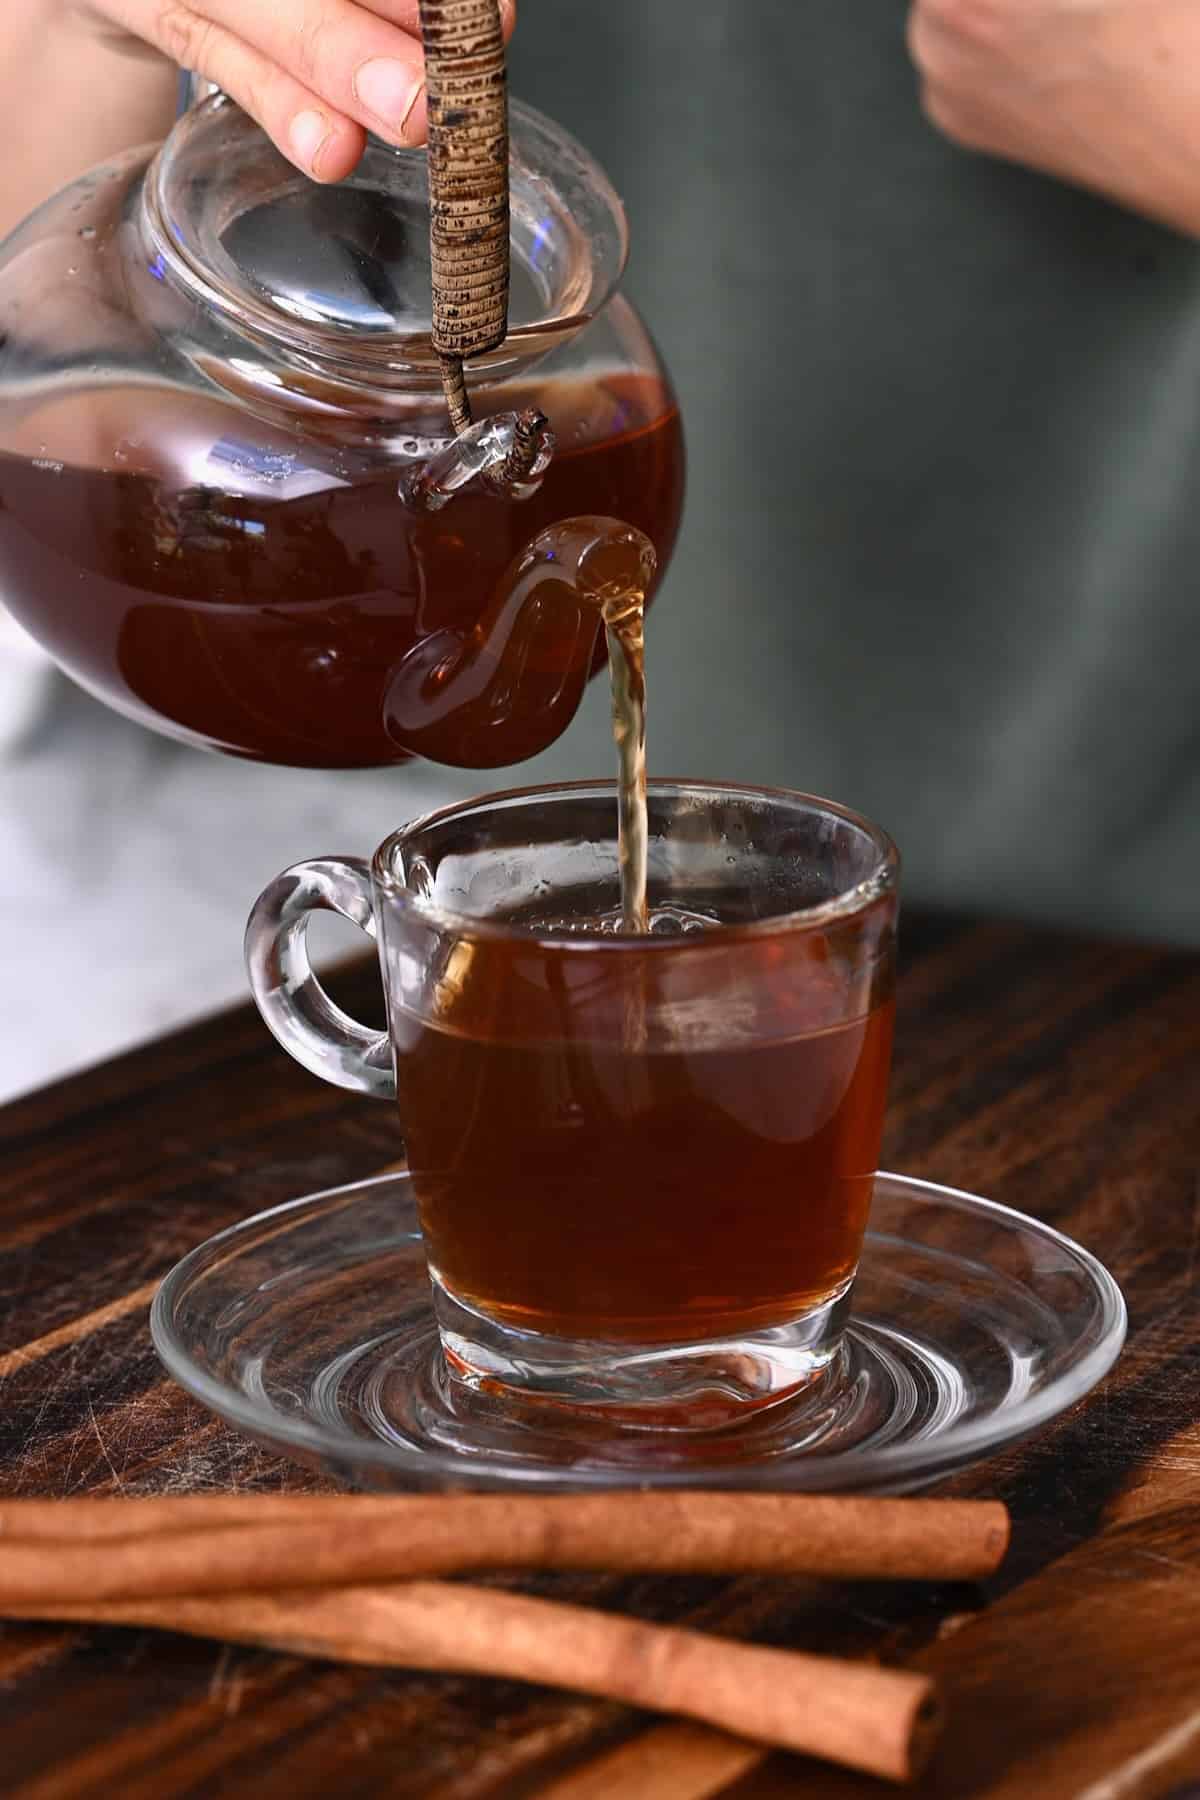 Pouring cinnamon tea from a tea pot into a glass cup